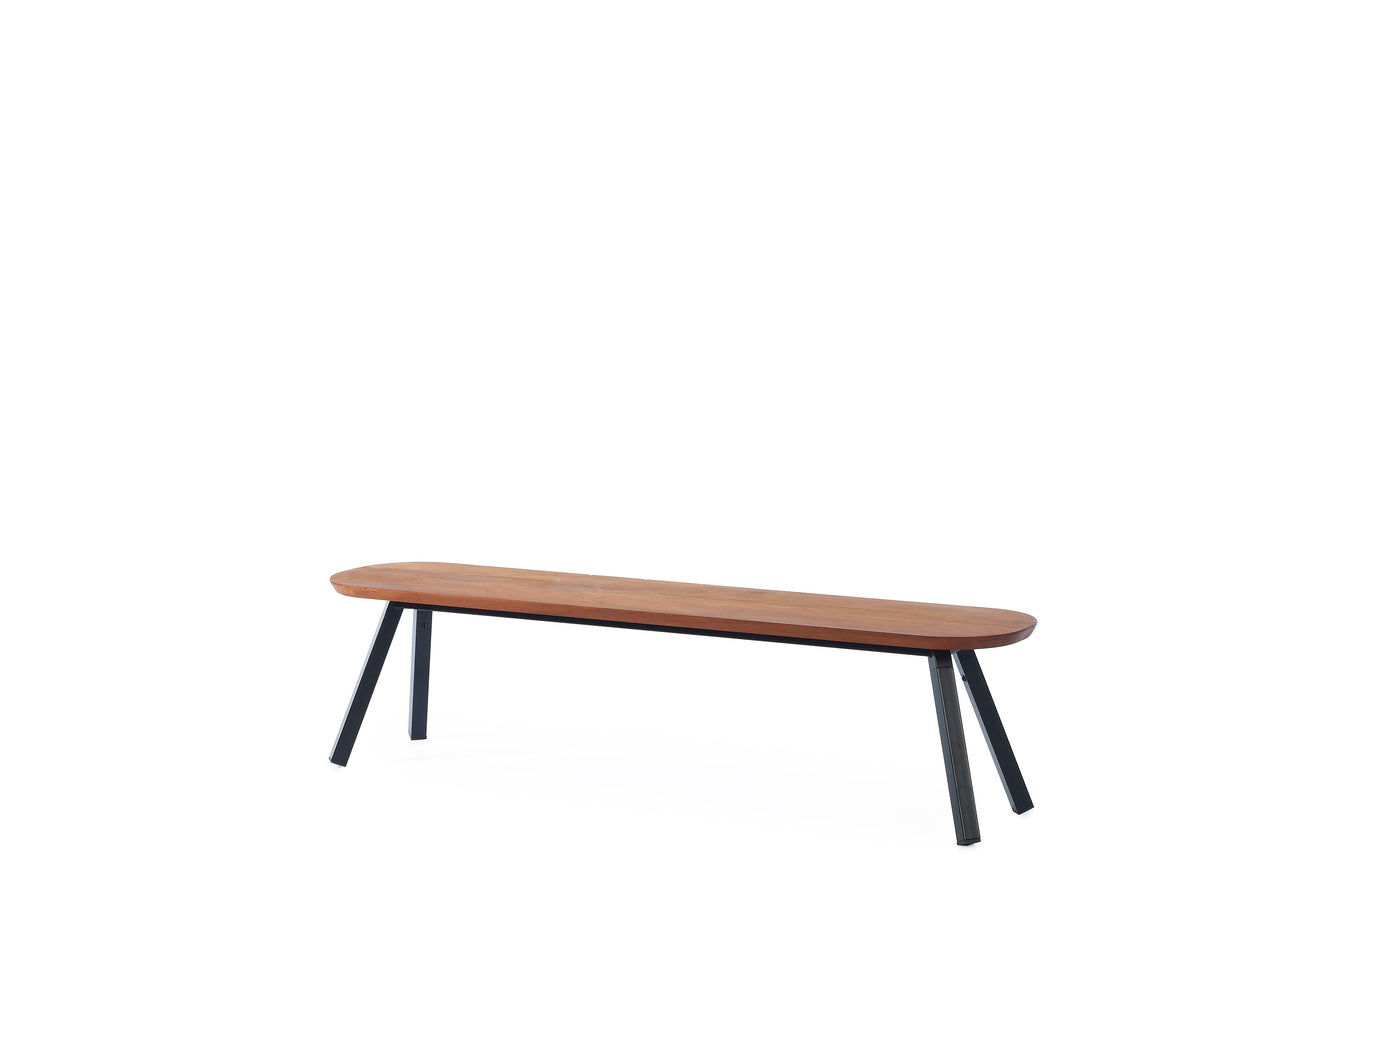 RS Barcelona You and Me Indoor / Outdoor Bench 180 Iroko, Kit of Two